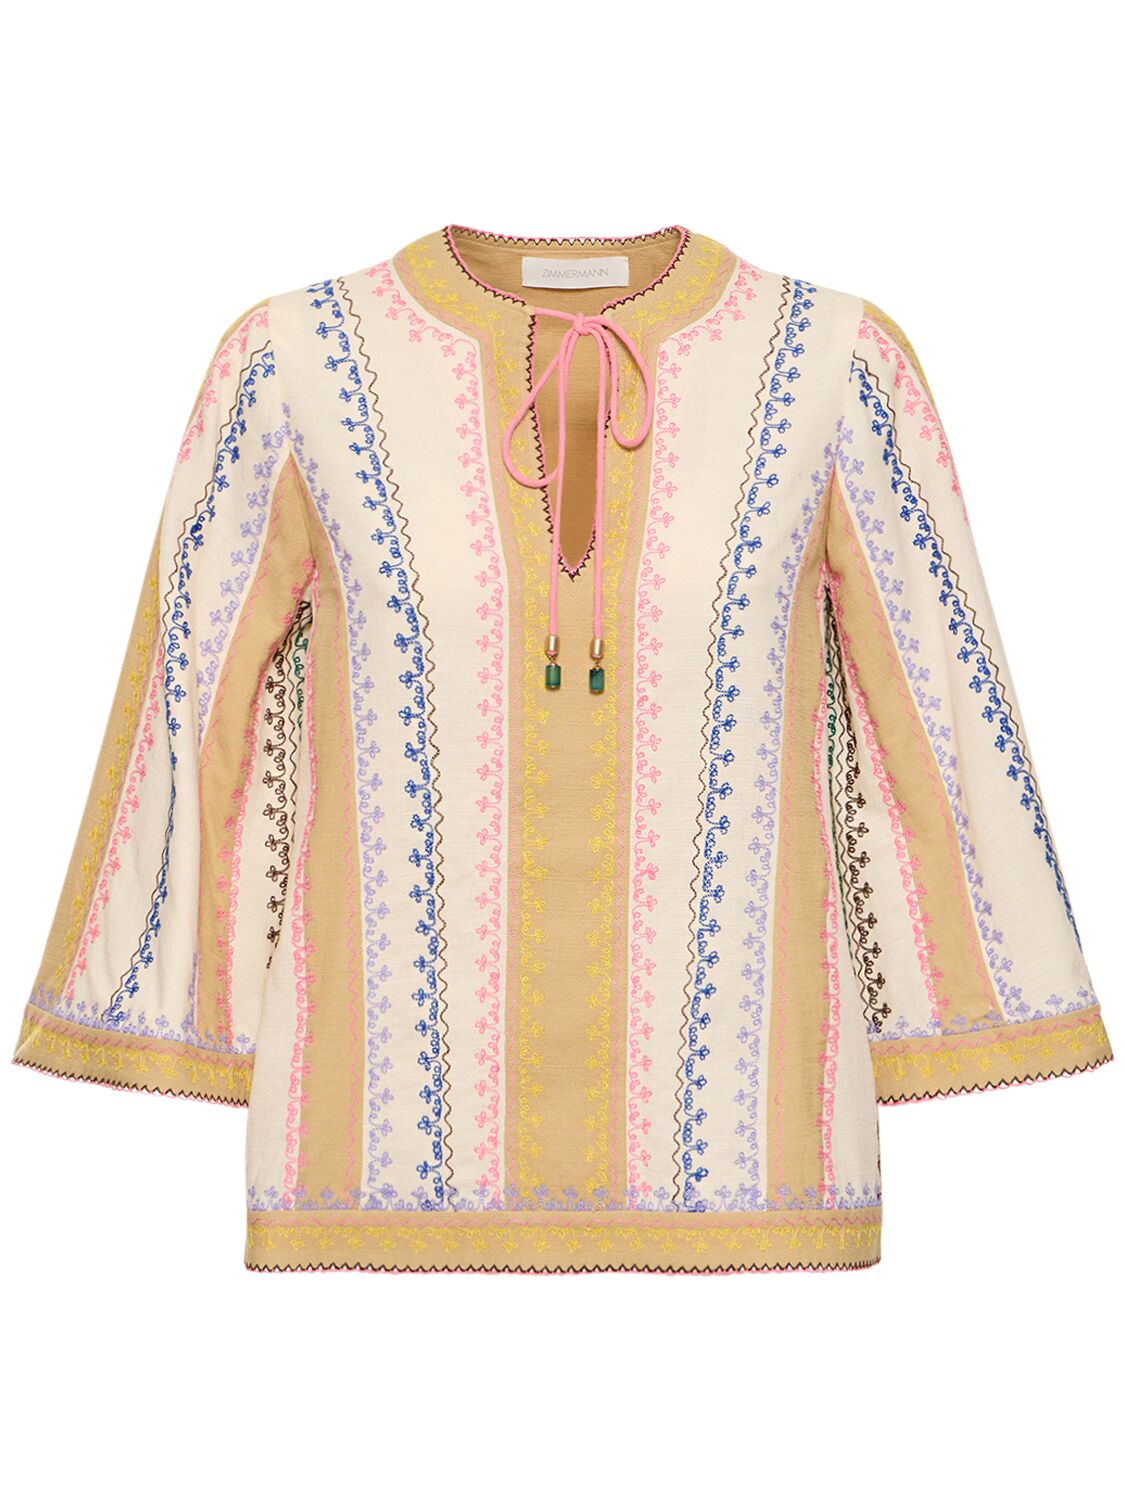 Zimmermann August Embroidered Cotton Blouse In Multicolor